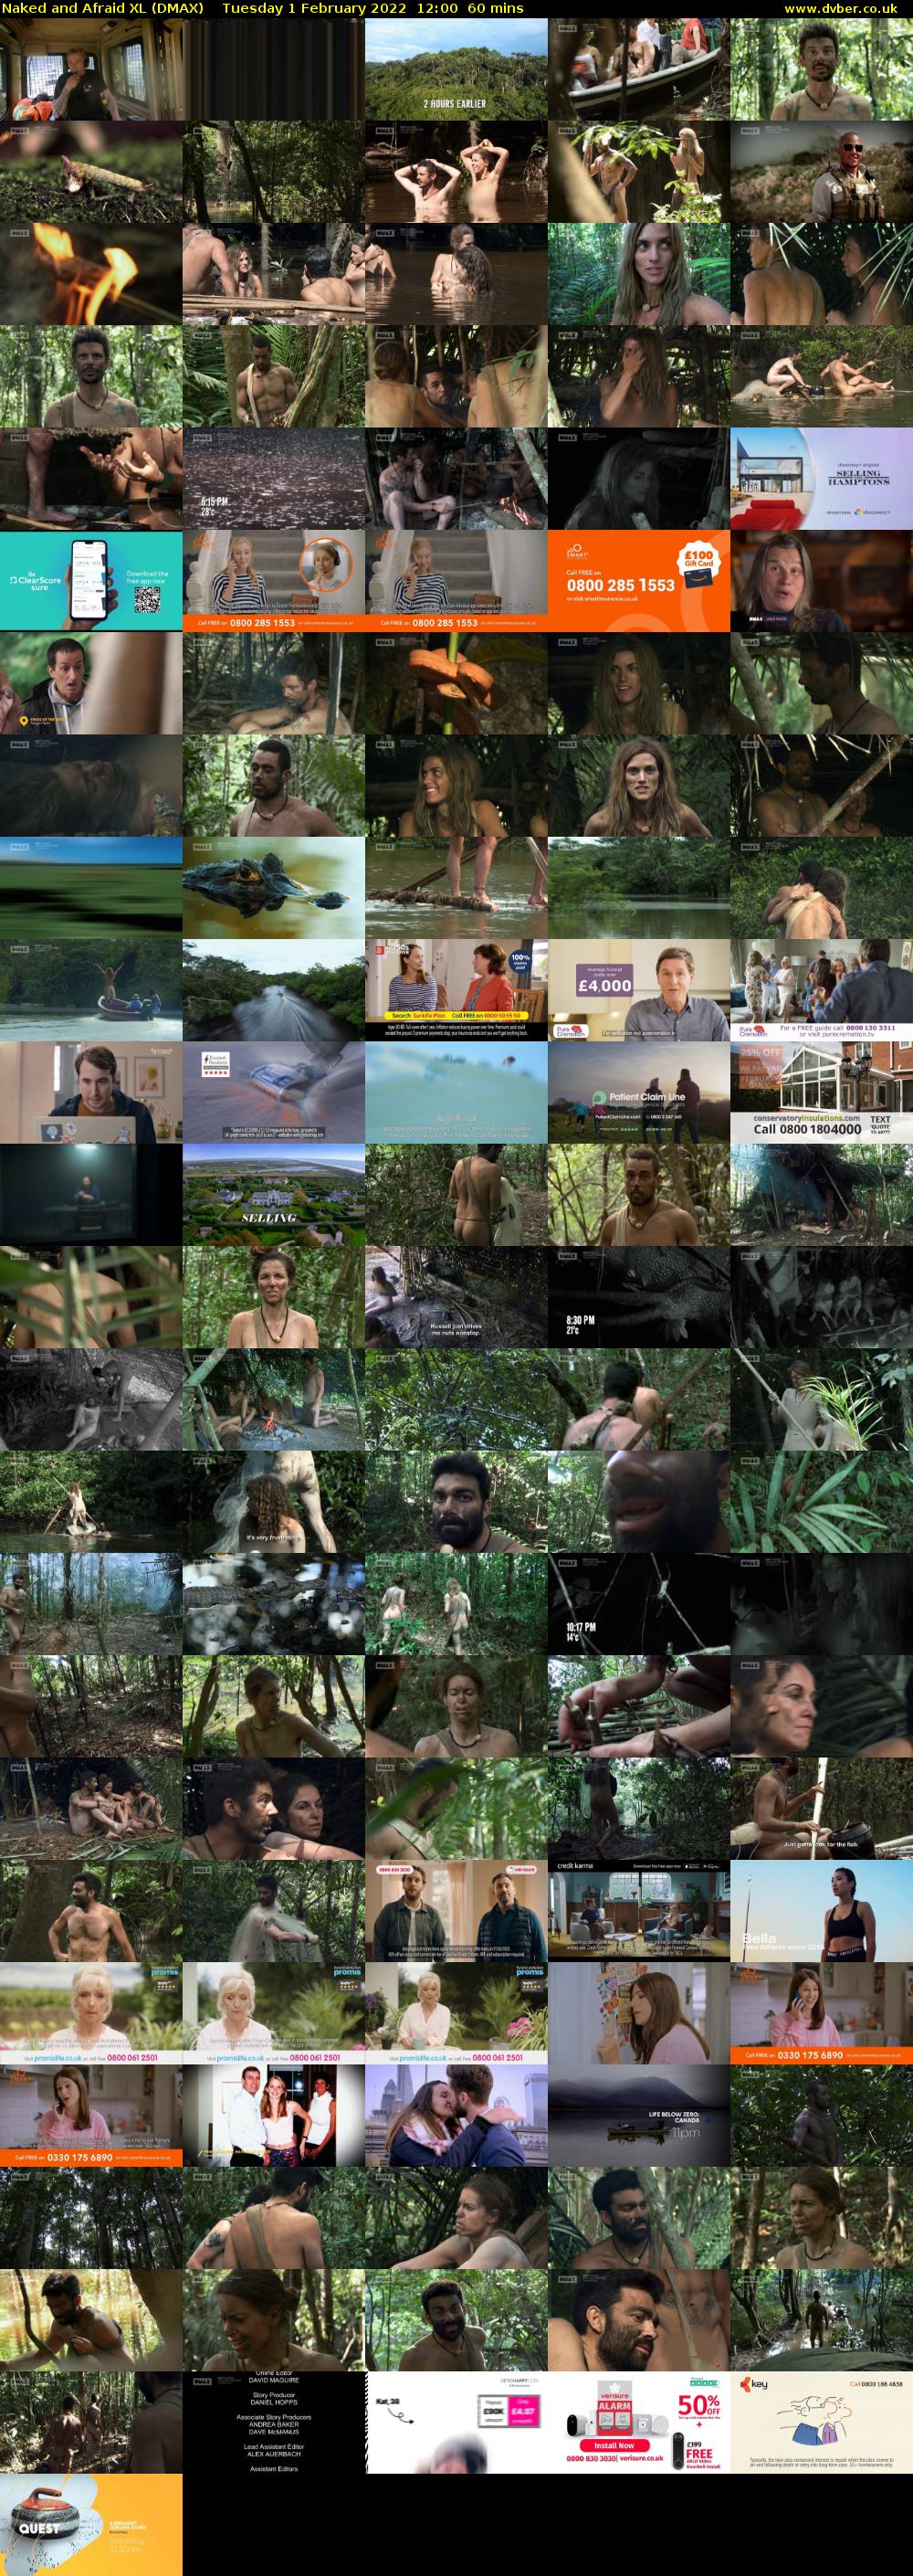 Naked and Afraid XL (DMAX) Tuesday 1 February 2022 12:00 - 13:00